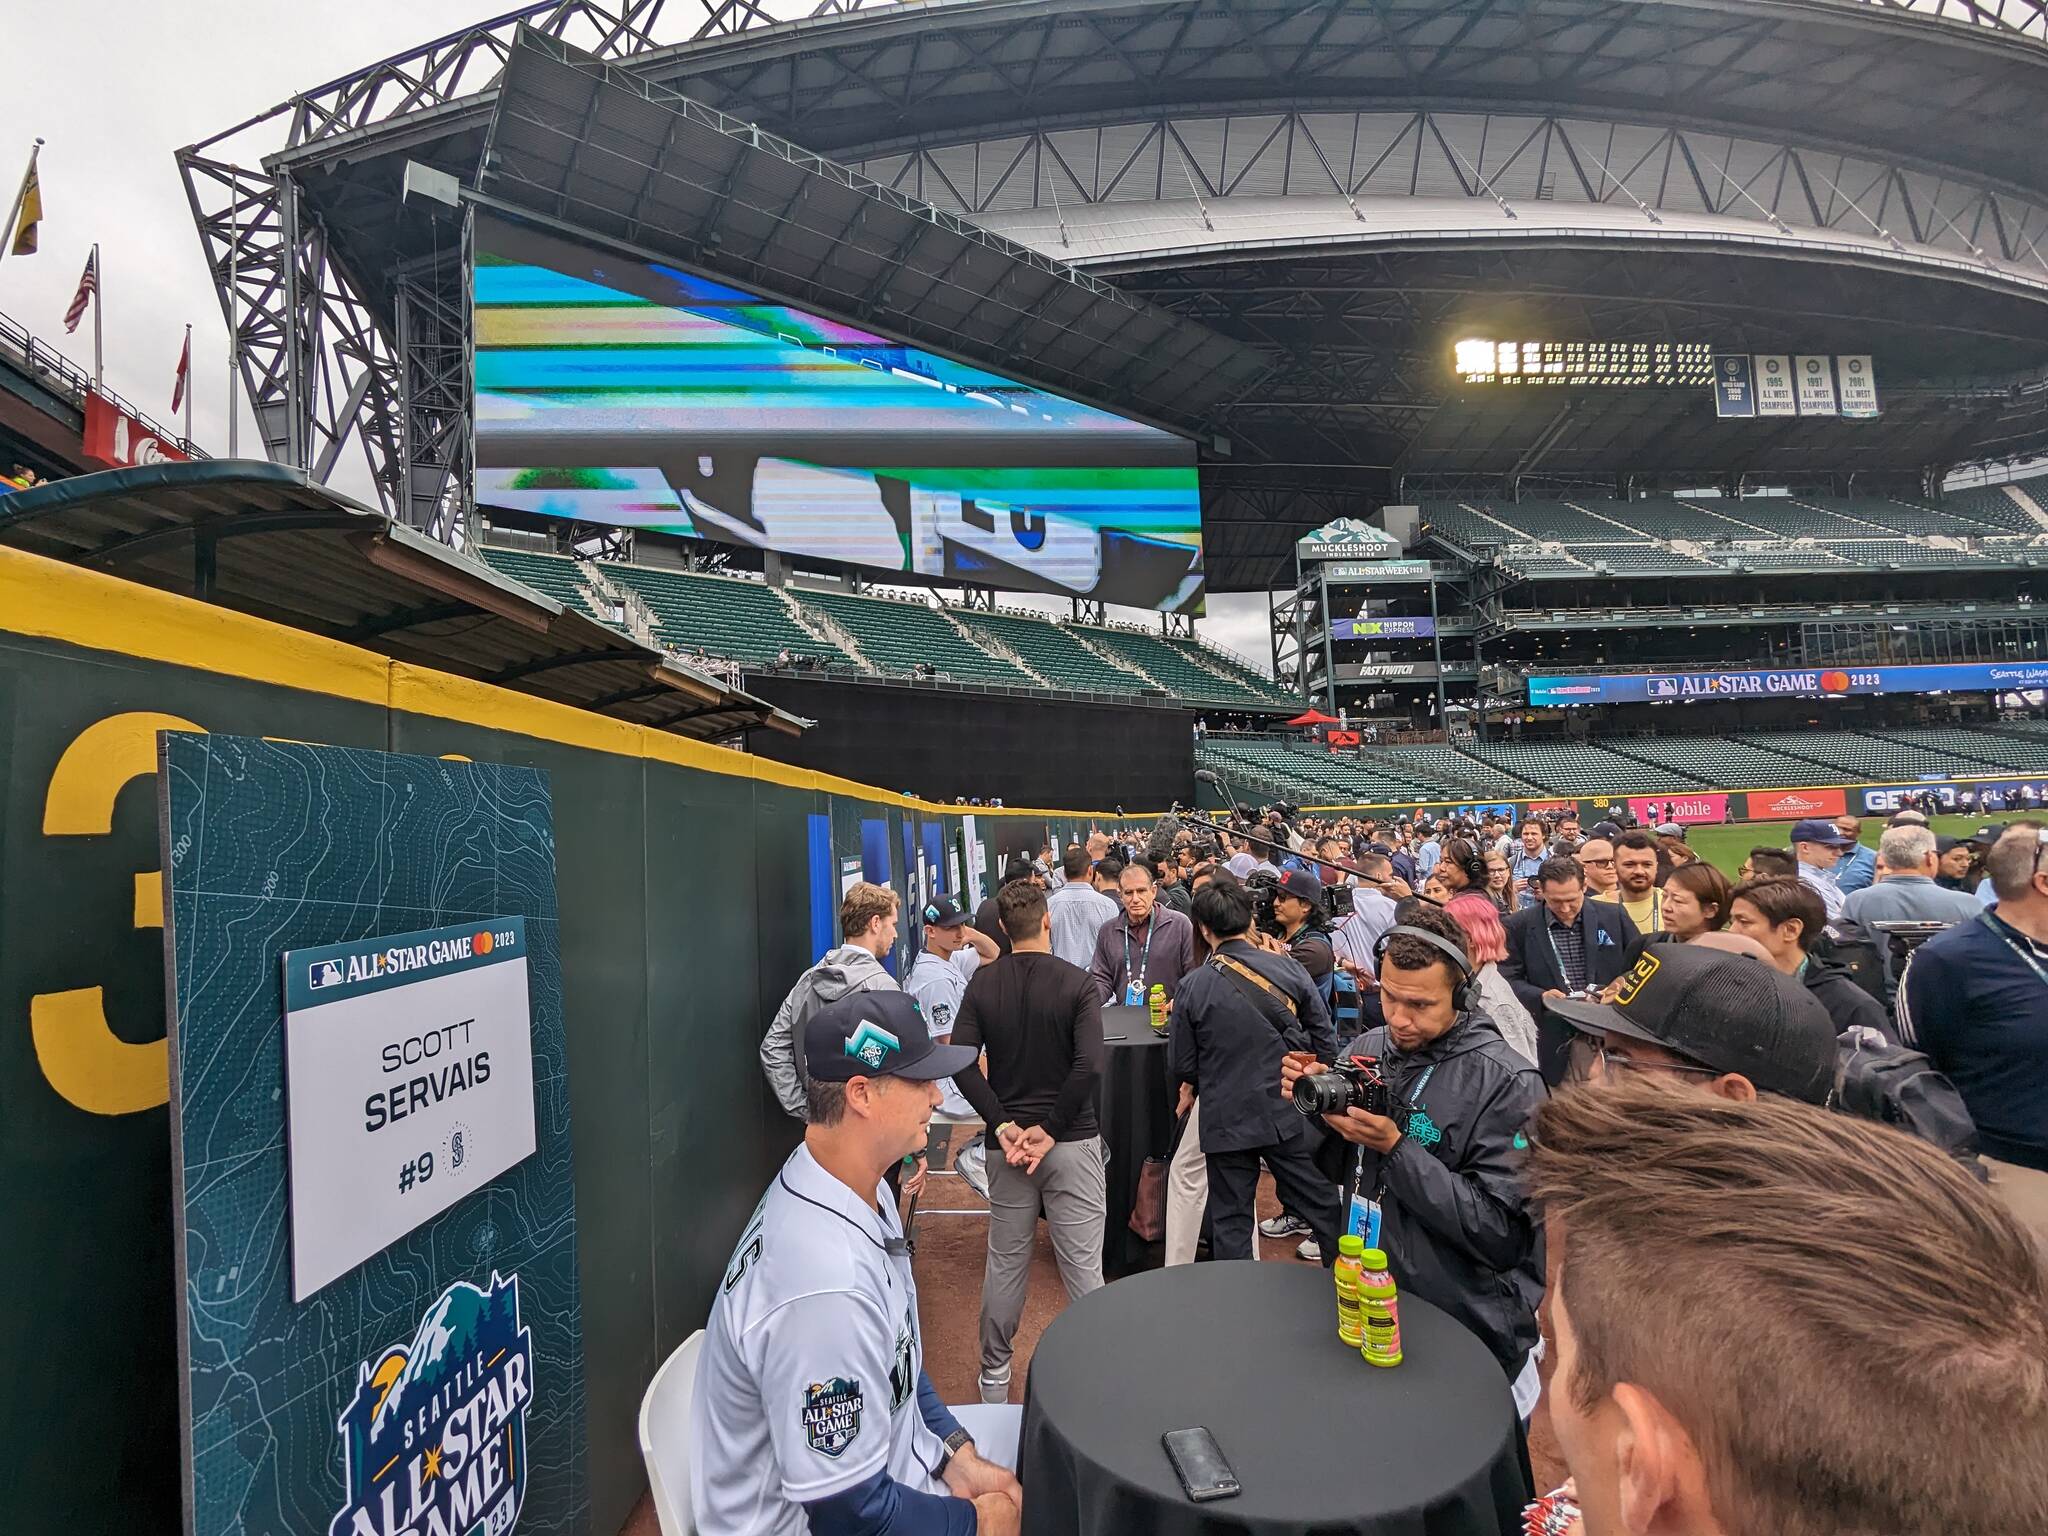 File photo
Mariners manager Scott Servais and crew had a solid following in the media for their home All-Star Game last summer.